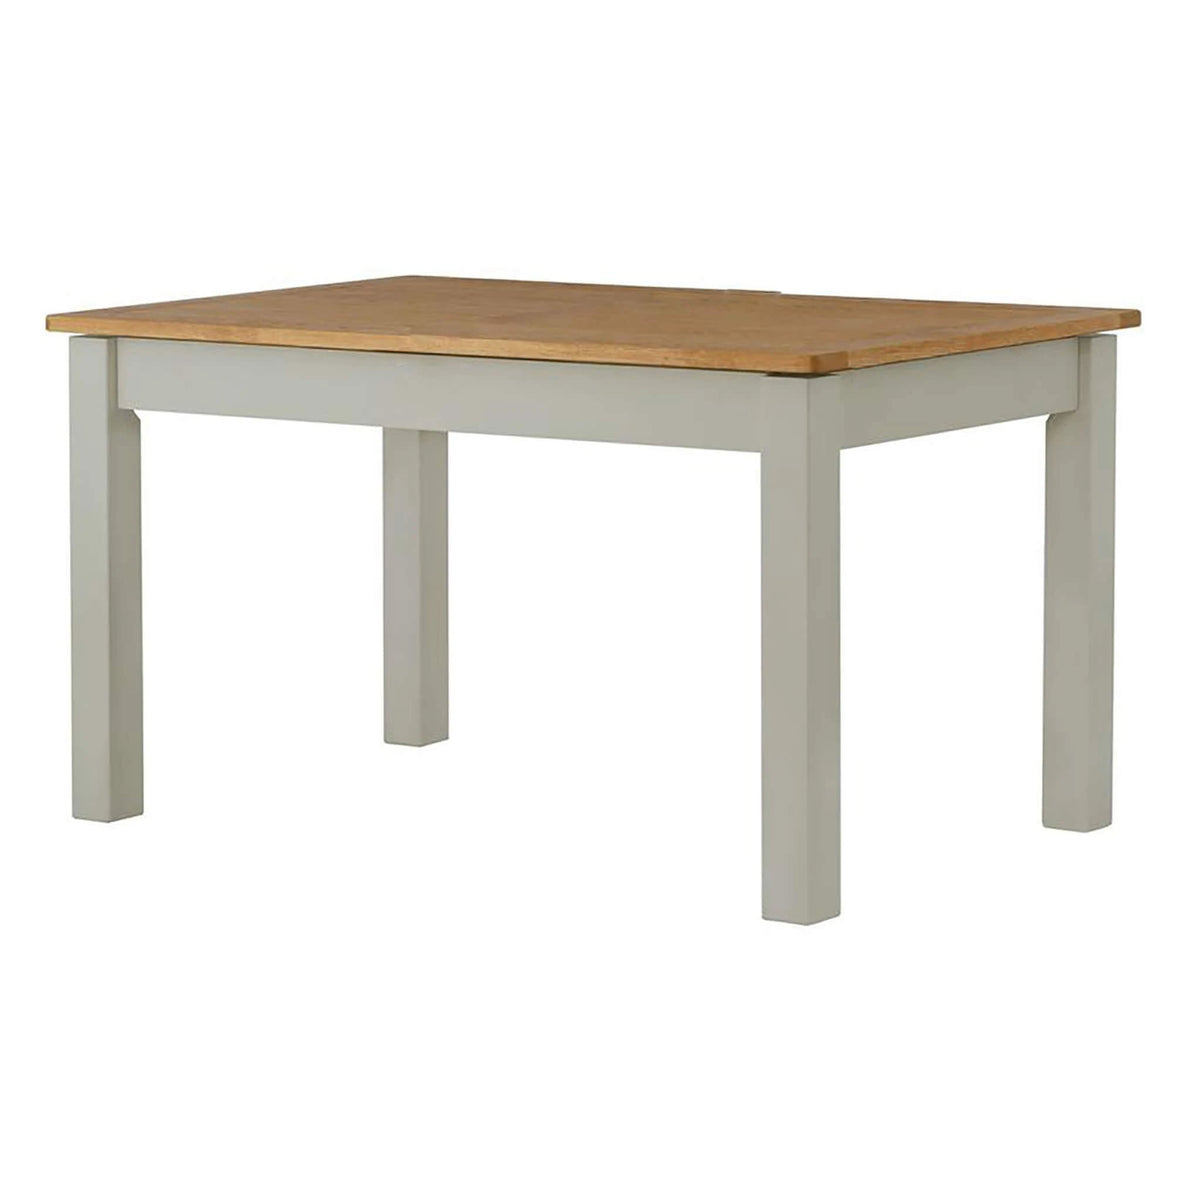 The Padstow Grey Wooden Dining Table with Oak Top 120cm from Roseland Furniture